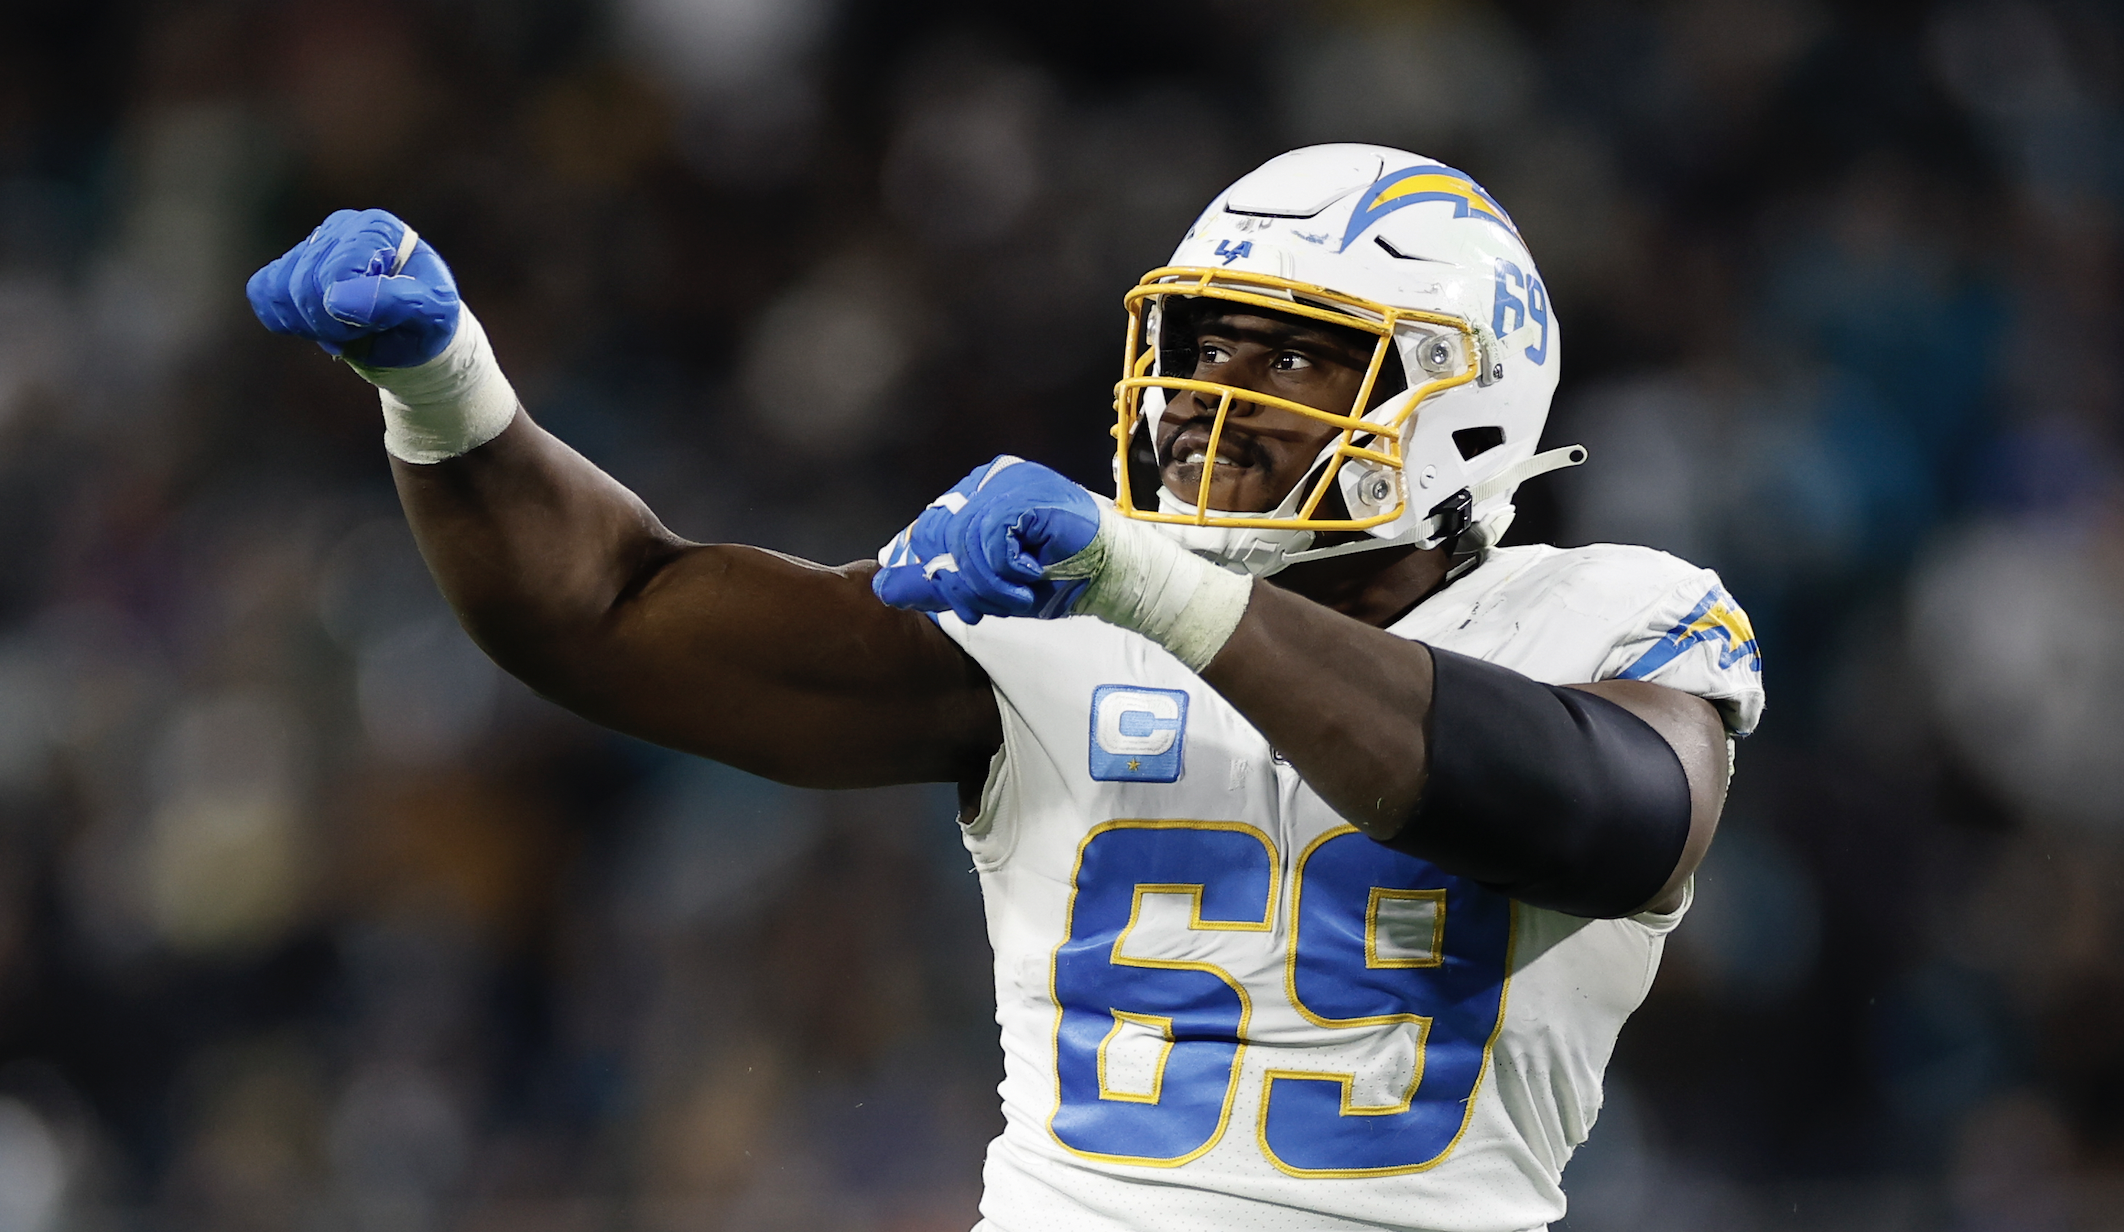 NFL Lineman Claims He Was Sexually Assaulted By TSA: ‘Extremely Unnecessary And Dehumanizing’